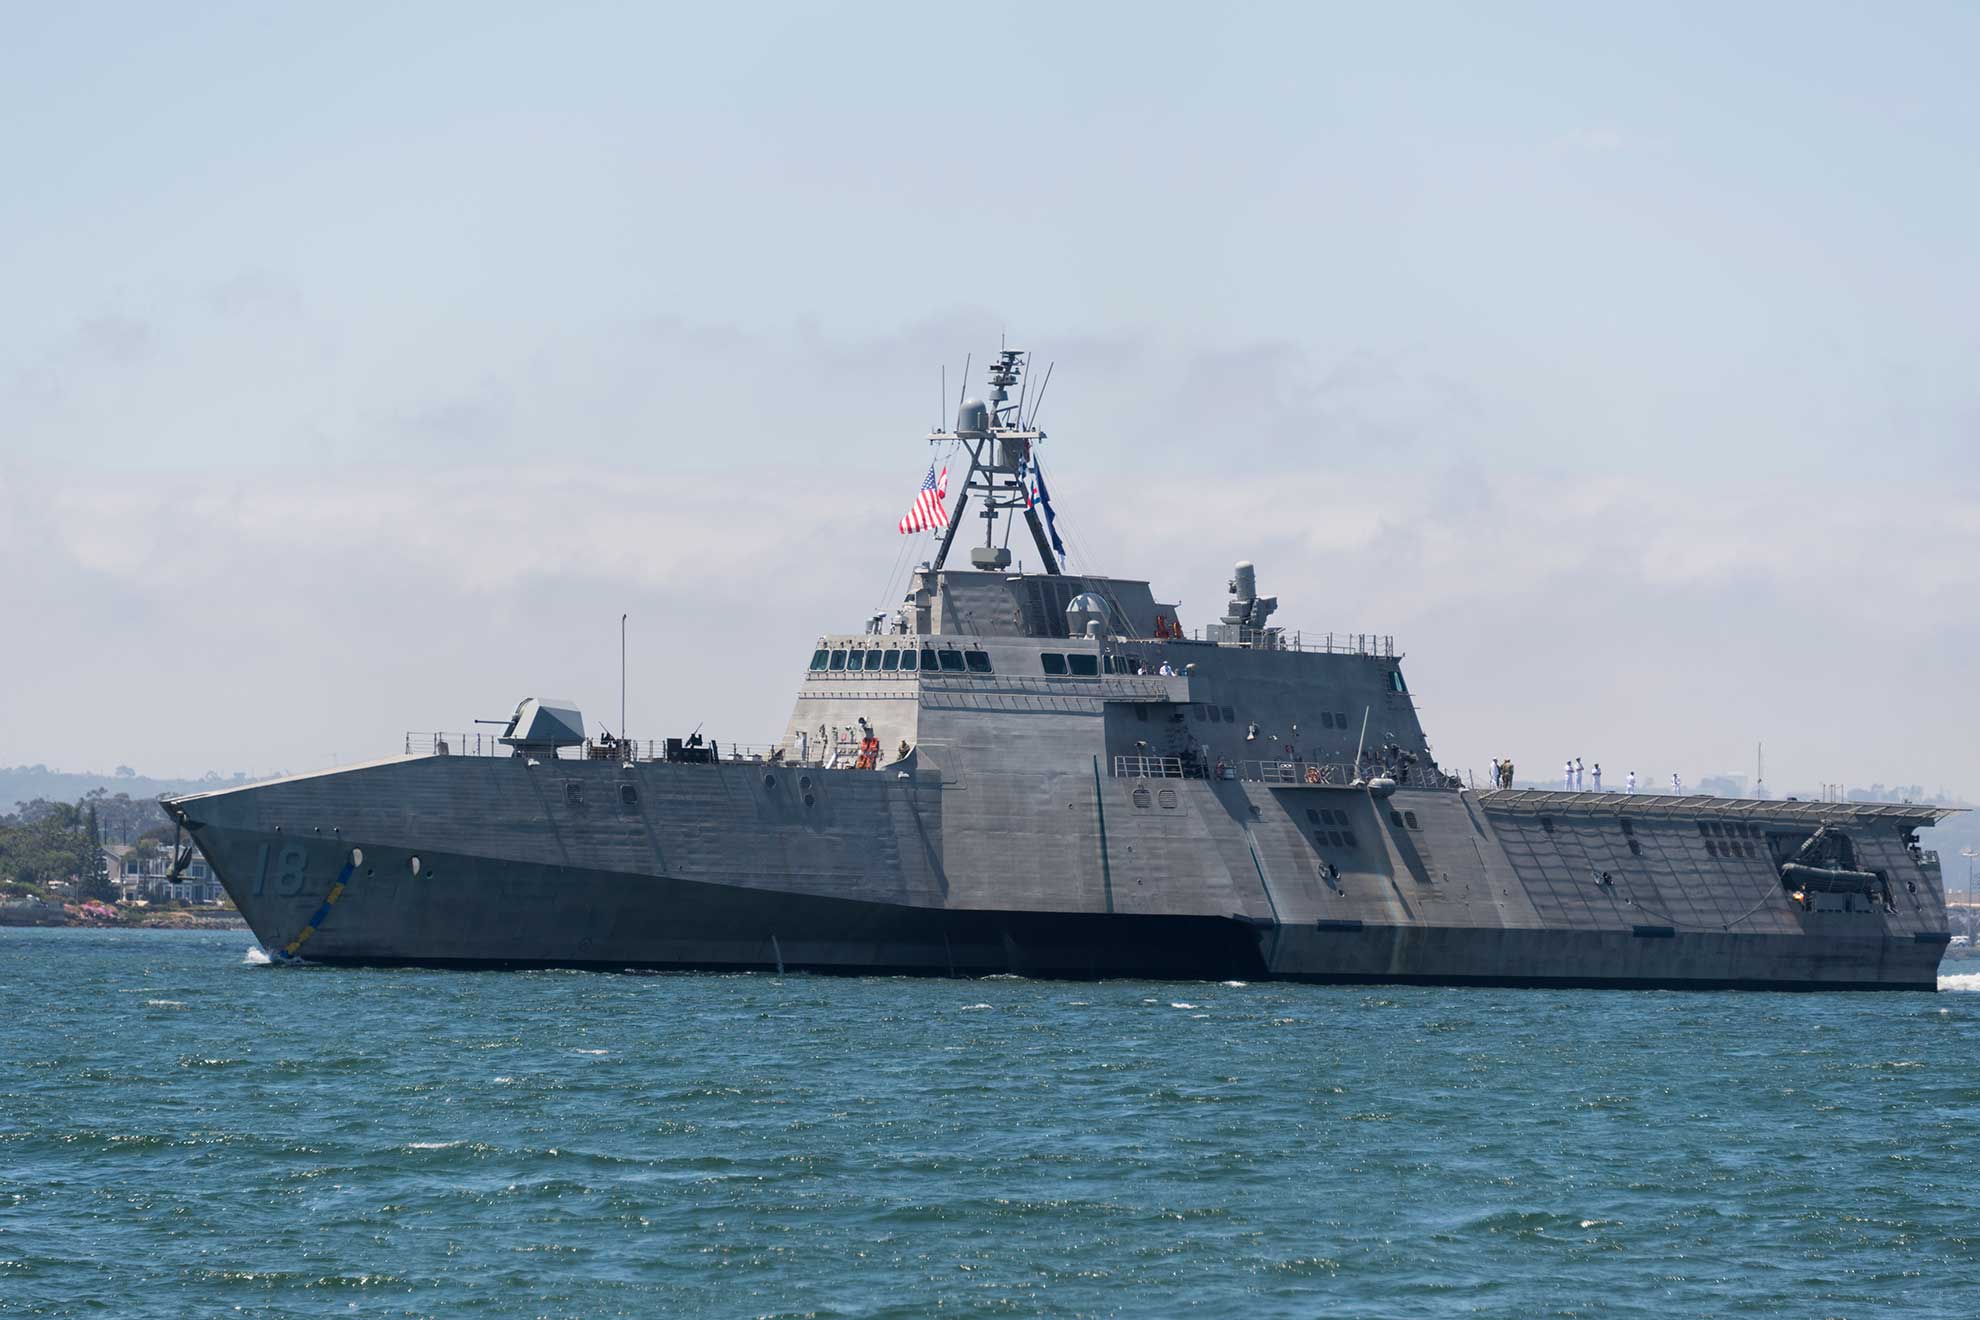 San Diego (April 19, 2019) The Independence-variant littoral combat ship USS Charleston (LCS 18) sails through San Diego Bay in transit to the ship's Naval Base San Diego homeport, successfully completing the ship's maiden voyage from the Austal USA shipyard in Mobile, Alabama. Charleston is the ninth ship in the littoral combat ship Independence-variant class and is the eleventh LCS to be homeported in San Diego -- U.S. Navy photo by MCS 1st Class Woody S. Paschall. -